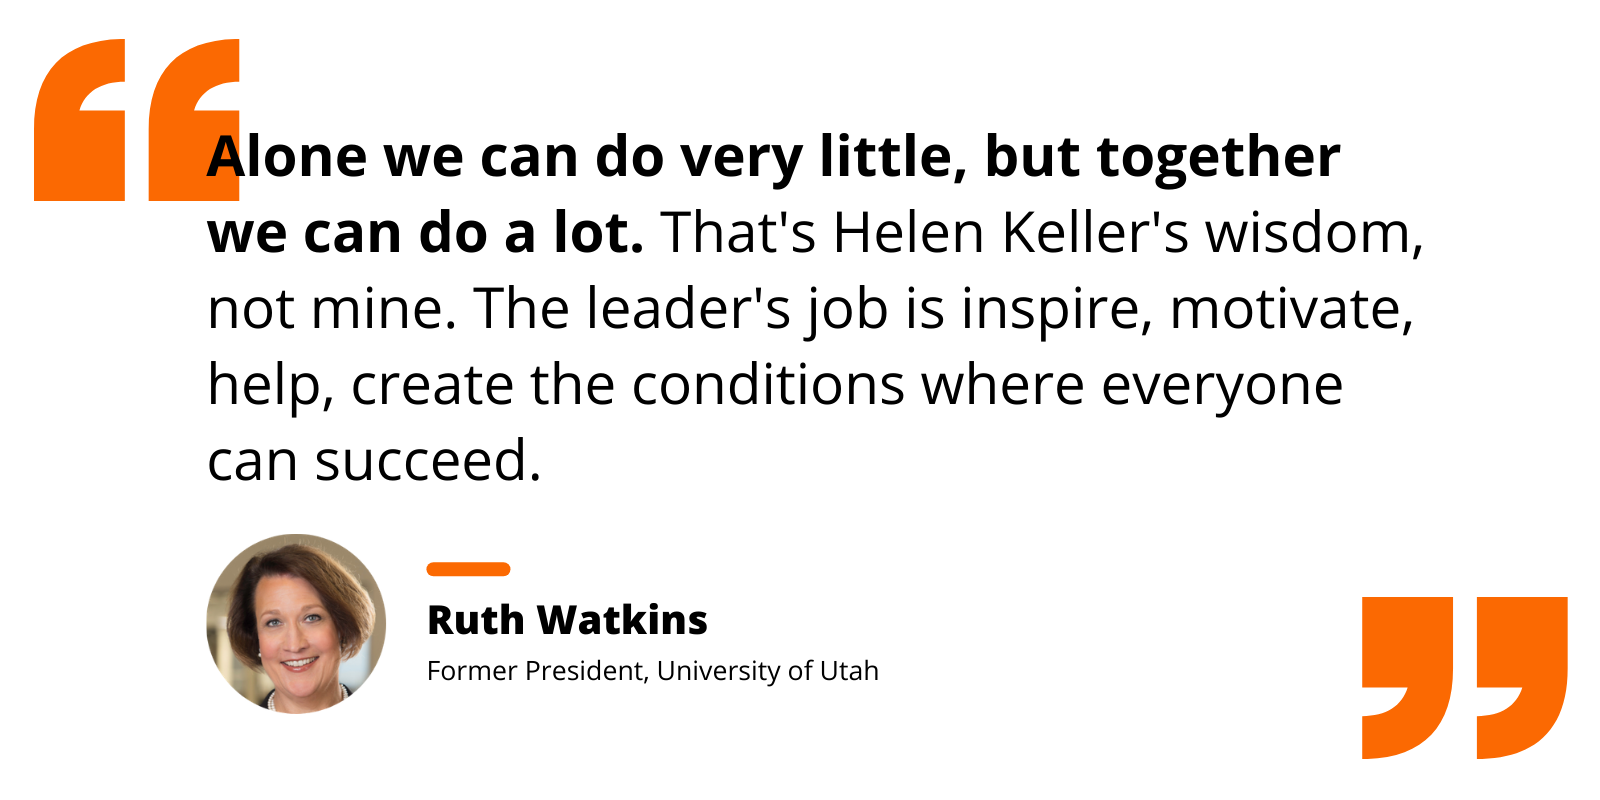 Quote by Ruth Watkins re: leaders creating conditions where everyone succeeds collectively through a shared agenda.